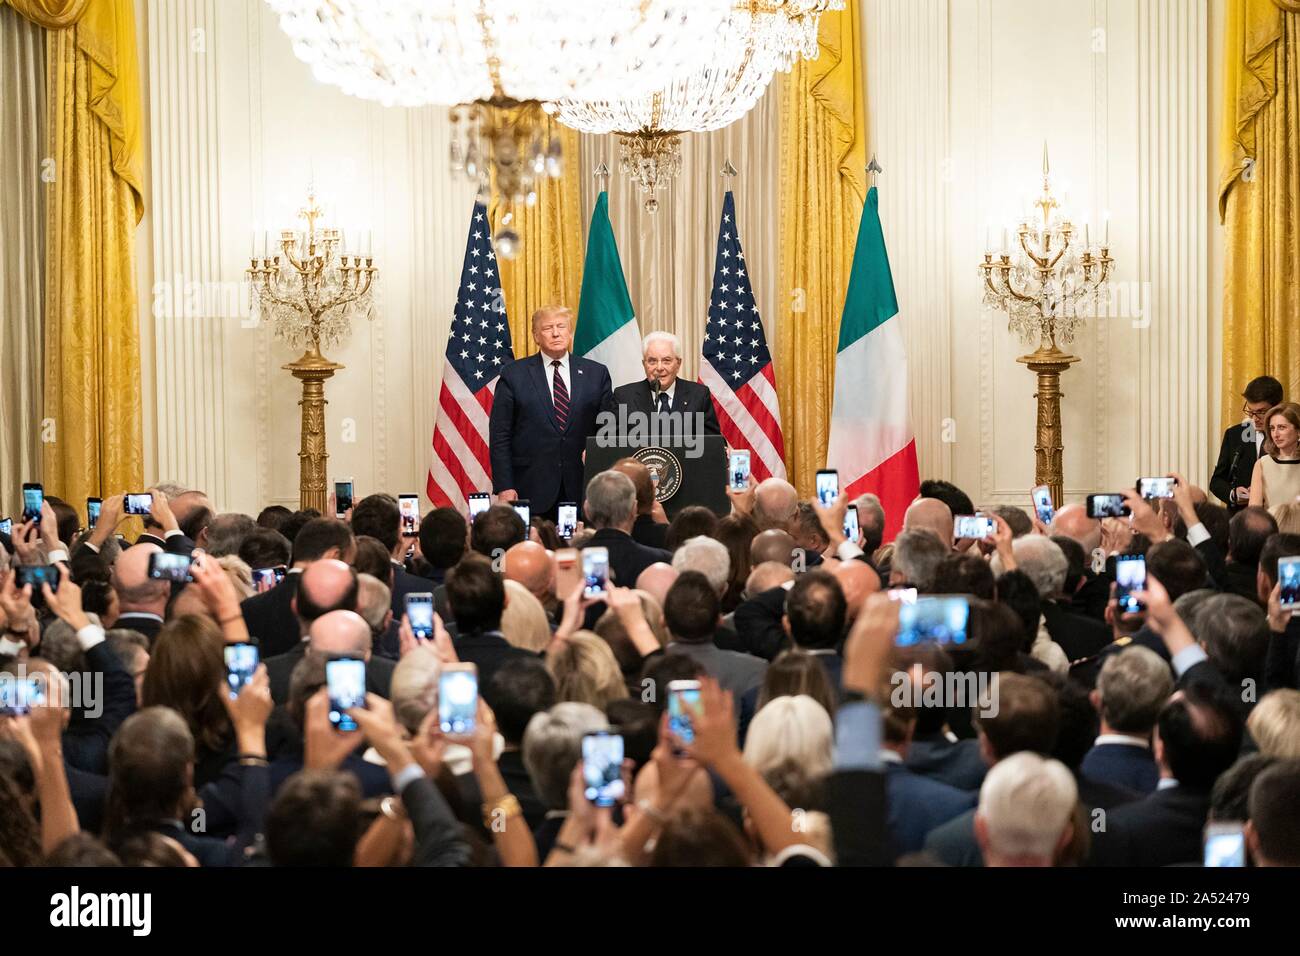 Washington, United States of America. 16 October, 2019. U.S President Donald Trump, left, looks on as Italian President Sergio Mattarella delivers remarks during a reception in the East Room of the White House October 16, 2019 in Washington, DC. Credit: Andrea Hanks/White House Photo/Alamy Live News Stock Photo